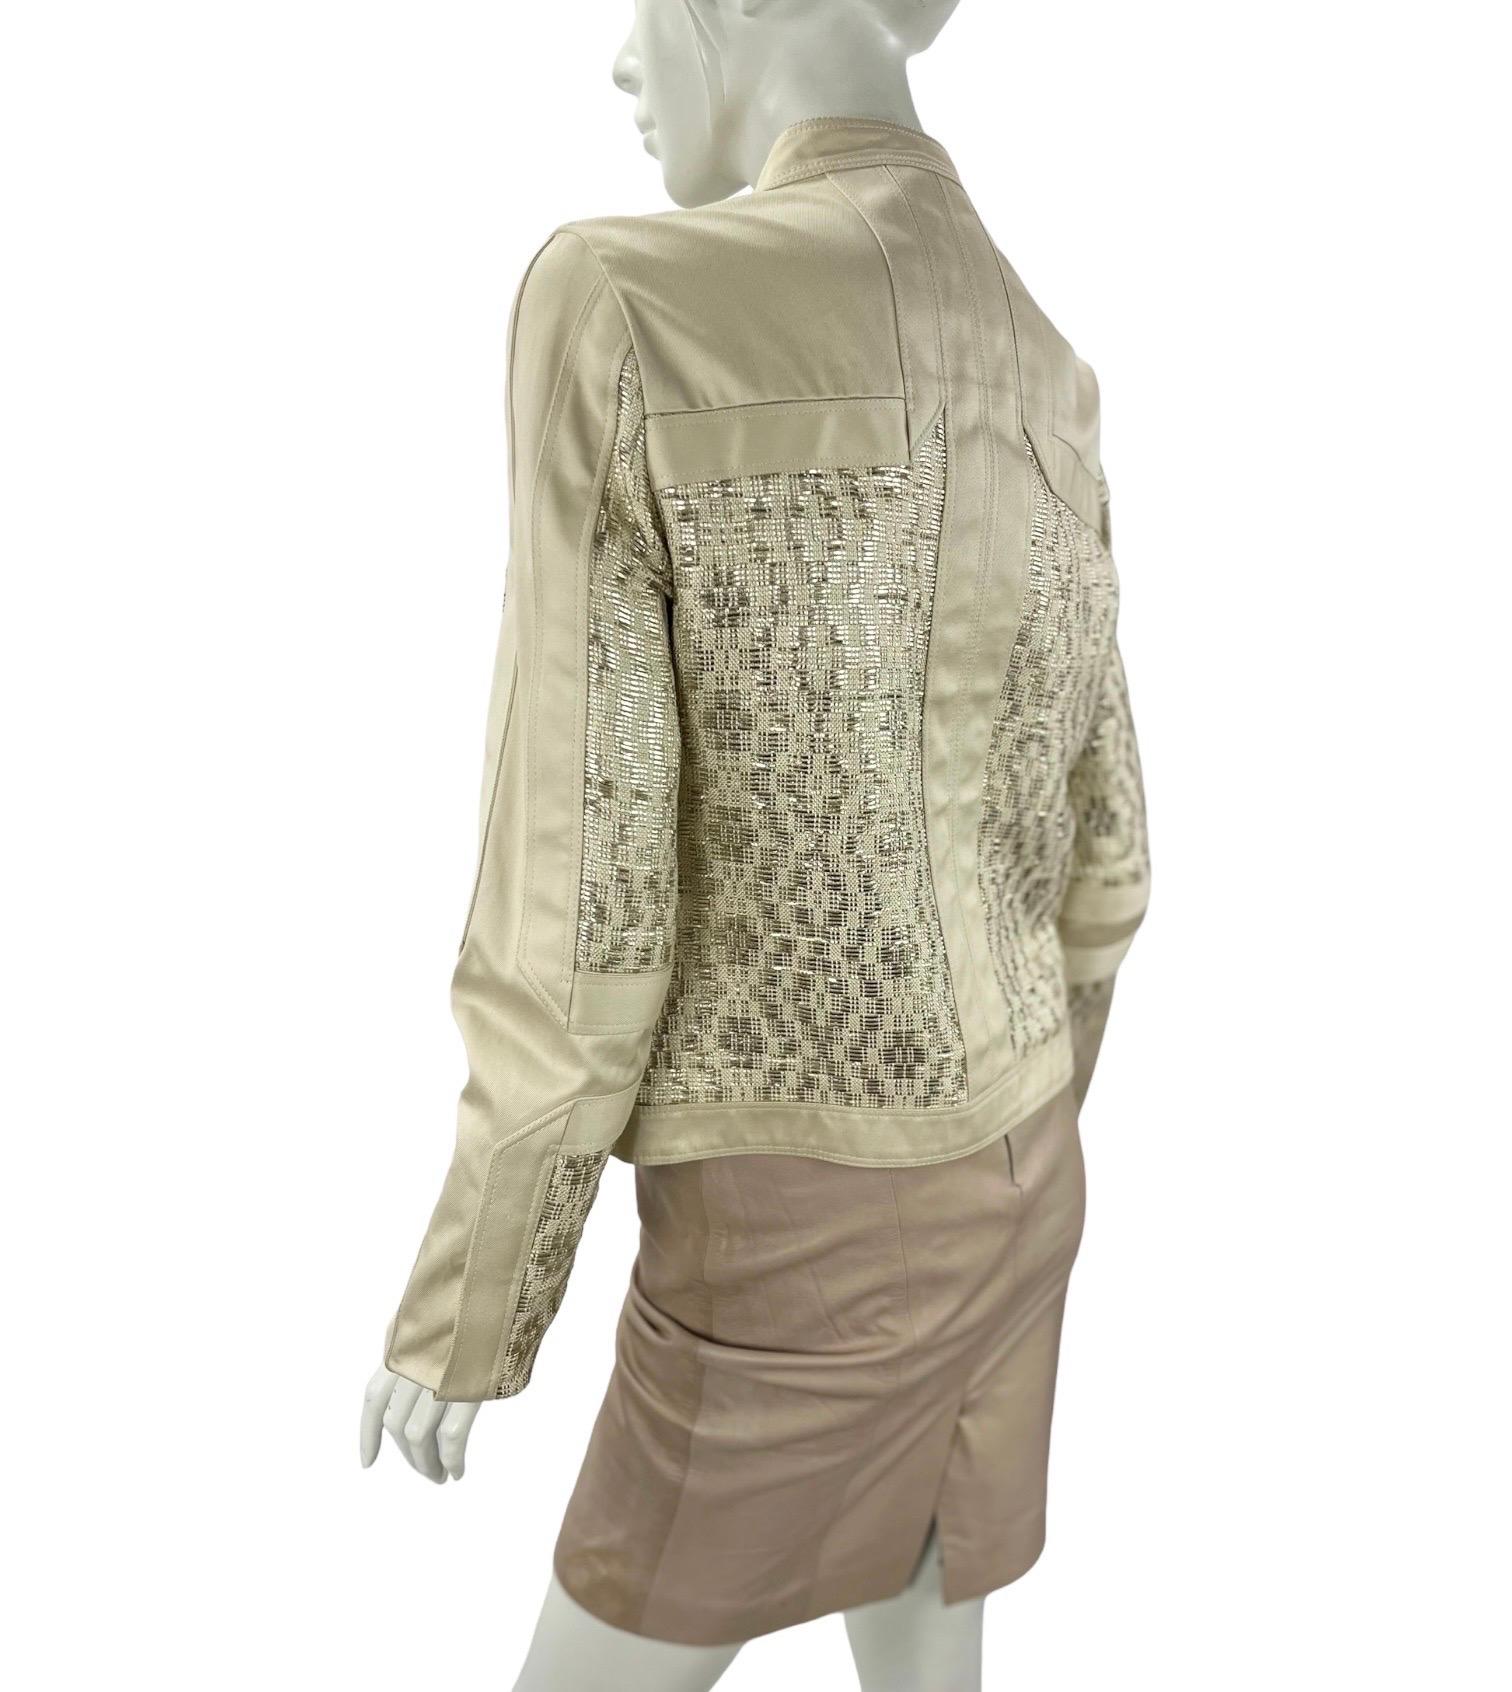 2004 Vintage Tom Ford for Gucci Nude Gabardine and Gold Leather Biker Jacket 
Editor’s note:
A Fabulous Creation from Tom Ford Era 2004 Spring/Summer collection. Impossible to find!
Details:
IT Size 42 - US 6, shoulders 16